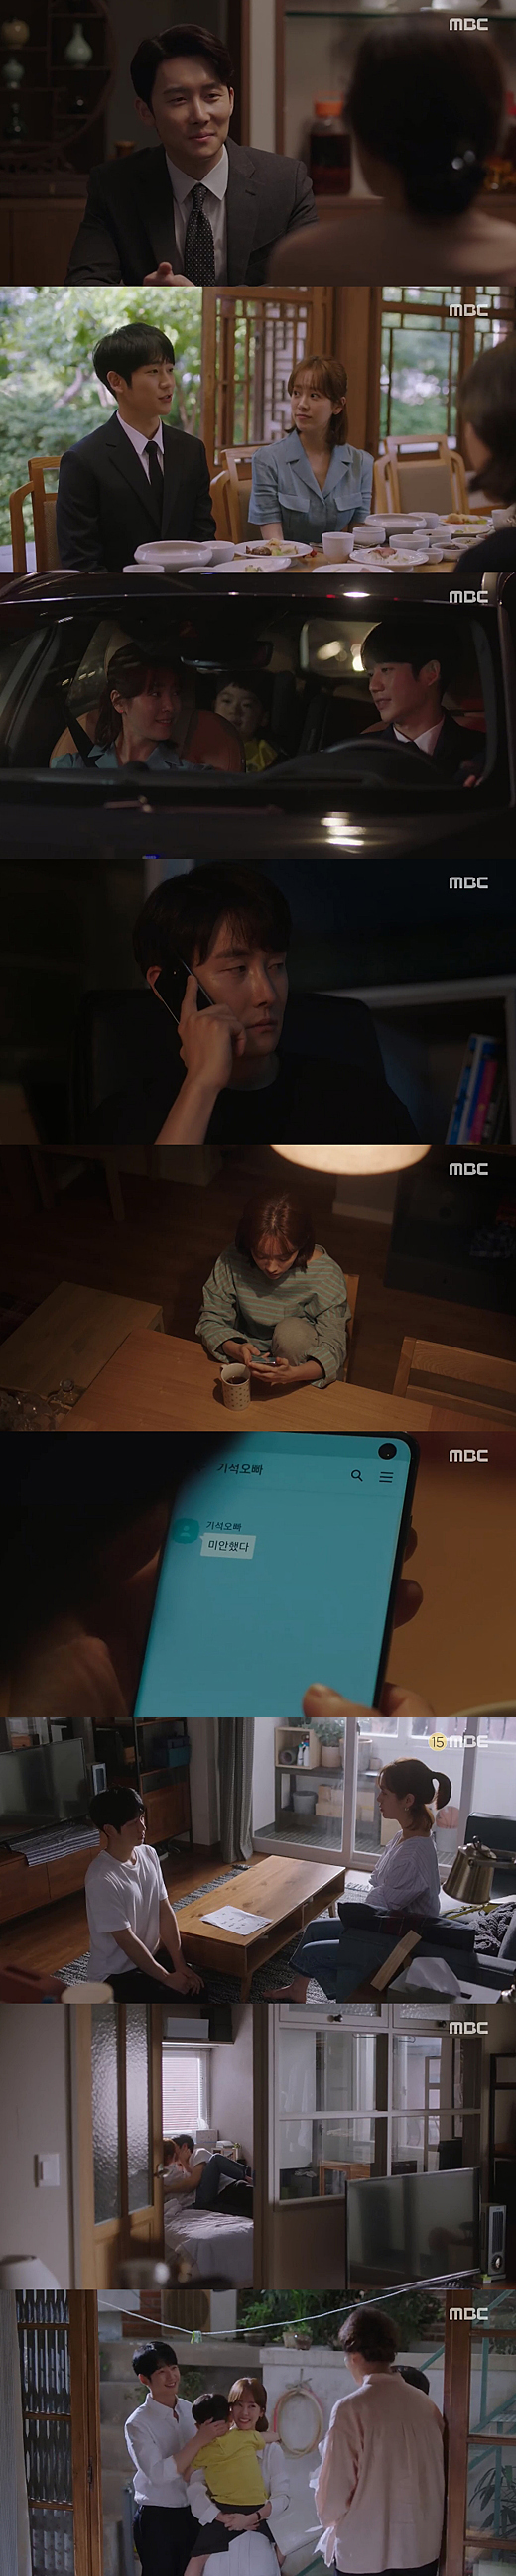 One spring brought Mr. JiHo.On the 11th, MBC drama Spring Night (playplayed by Kim Eun, director Ahn Pan-seok) starring actor Han Ji-min and Jeong Hae-in ended.Kwon Gi-seok (Kim Jun-han), who failed to let go of his obsession with Choi Jung-in, told Choi Jung-ins mother about Yoo Ji-Hos gossip, but JiHo, who met Choi Jung-ins mother with his son Jung Eun-woo, said, Choi Jung-in, I have only believed in one person, but I have to protect it no matter what. Choi Jung-ins father also put his selfishness on Choi Jung-ins solid heartfelt daughter marriage.It was only when his fathers I did enough that Giseok abandoned his obsession and sent Choi Jung-in a text saying Im sorry.Choi Jung-in then met JiHos parents and was allowed to marry, saying, I will do my best for Jung Eun-woo. Kiseok started a new start with a blind date with another woman.Finally, Choi Jung-in wrote to JiHo, Lee Jung-in must marry Yu JiHo.The memorandum I will be a virgin ghost in violation was read, and Choi Jung-in received a text message from JiHo saying Thank you for coming to me and JiHo received Choi Jung-in One spring brought Mr. JiHo.In the last scene, Choi Jung-in went to JiHos pharmacy and said, Give me a drink-breaking medicine, as he first met, and JiHo and Choi Jung-in kissed the pharmacy and finished the whole story.Meanwhile, the follow-up to Spring Night is Na Hae-ryung (played by Kim Ho-soo, directed by Kang Il-soo Han Hyun-hee), starring actor Shin Se-kyung and boy group Astro member Jung Eun-woo.The romance of Prince Irim with Na Hae-ryung, the first problematic first lady of Joseon, the film will air on Thursday.